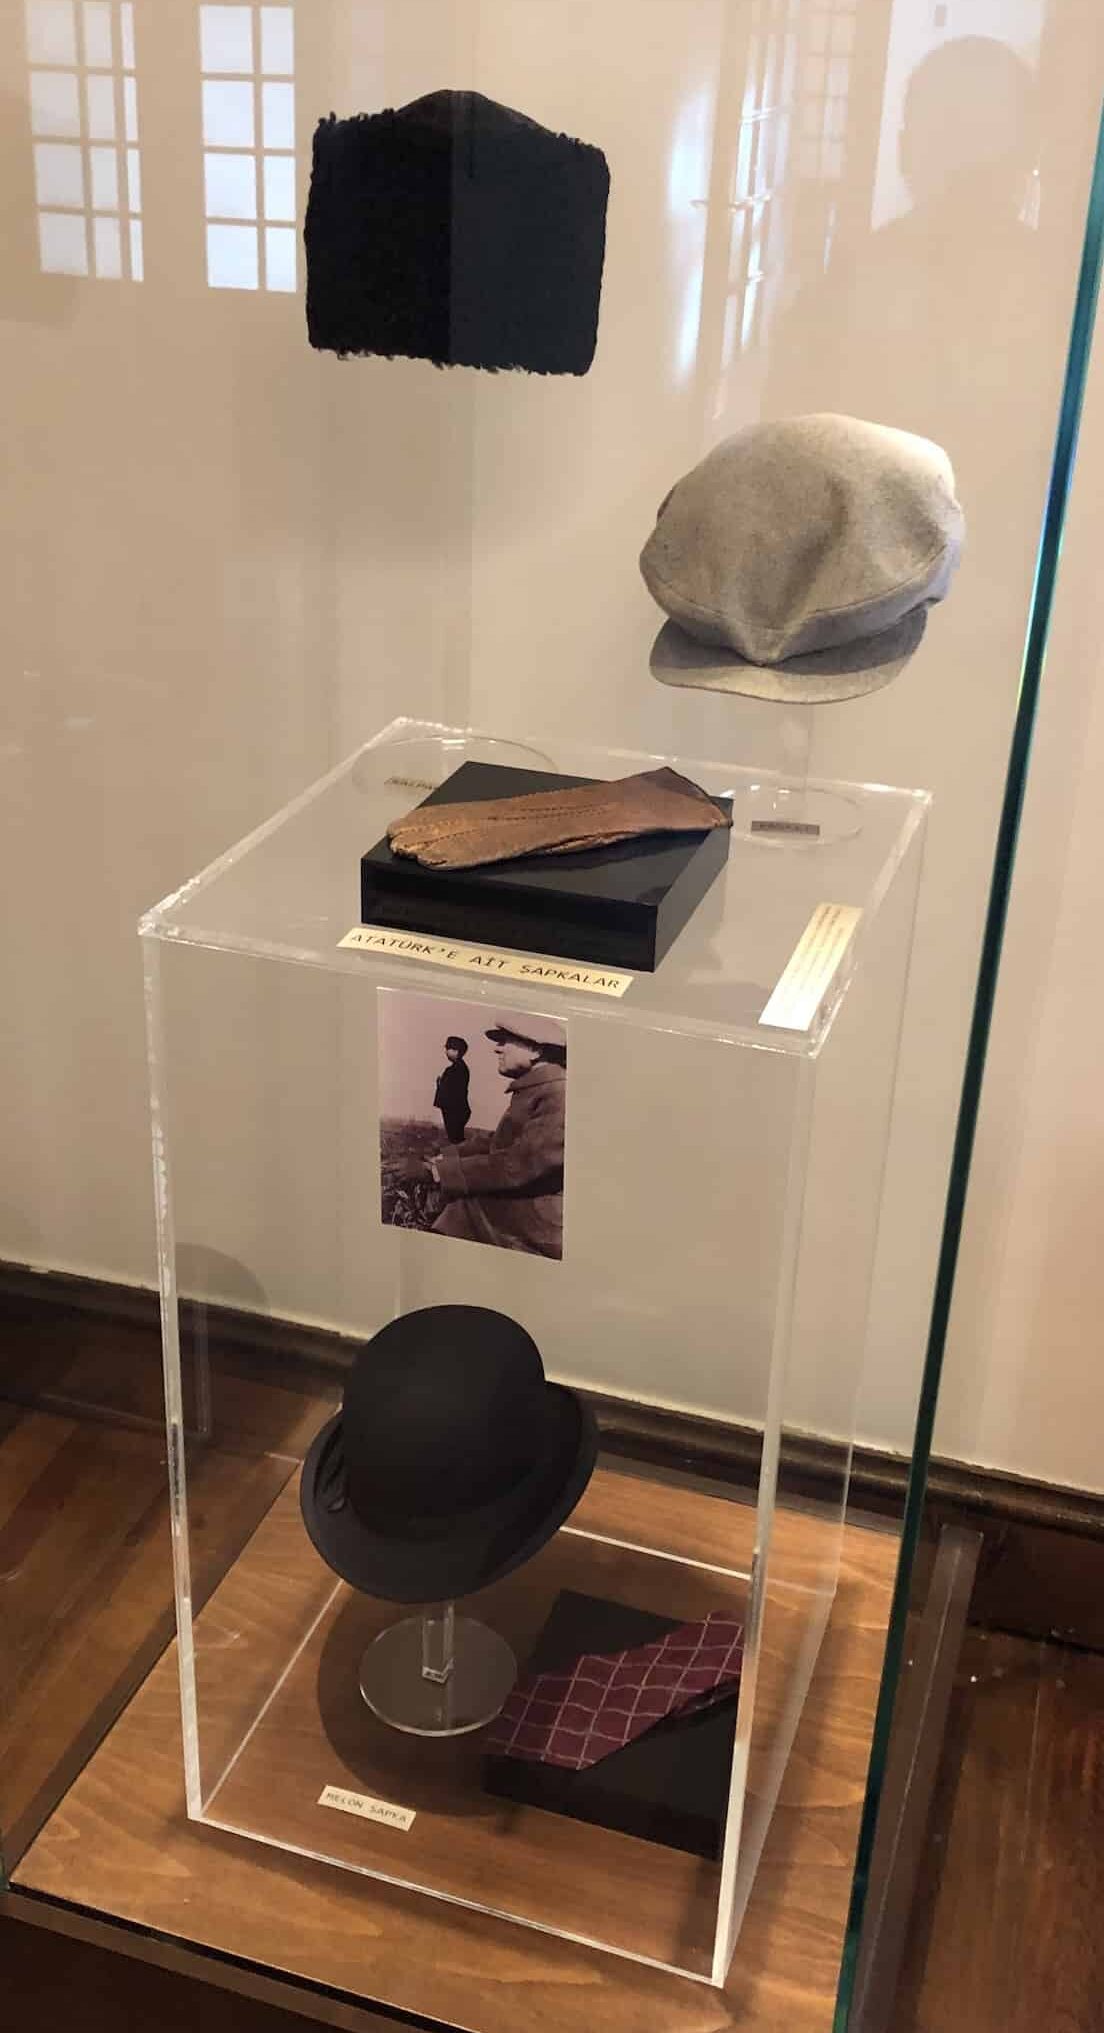 Hats used by Atatürk to introduce the Hat Law